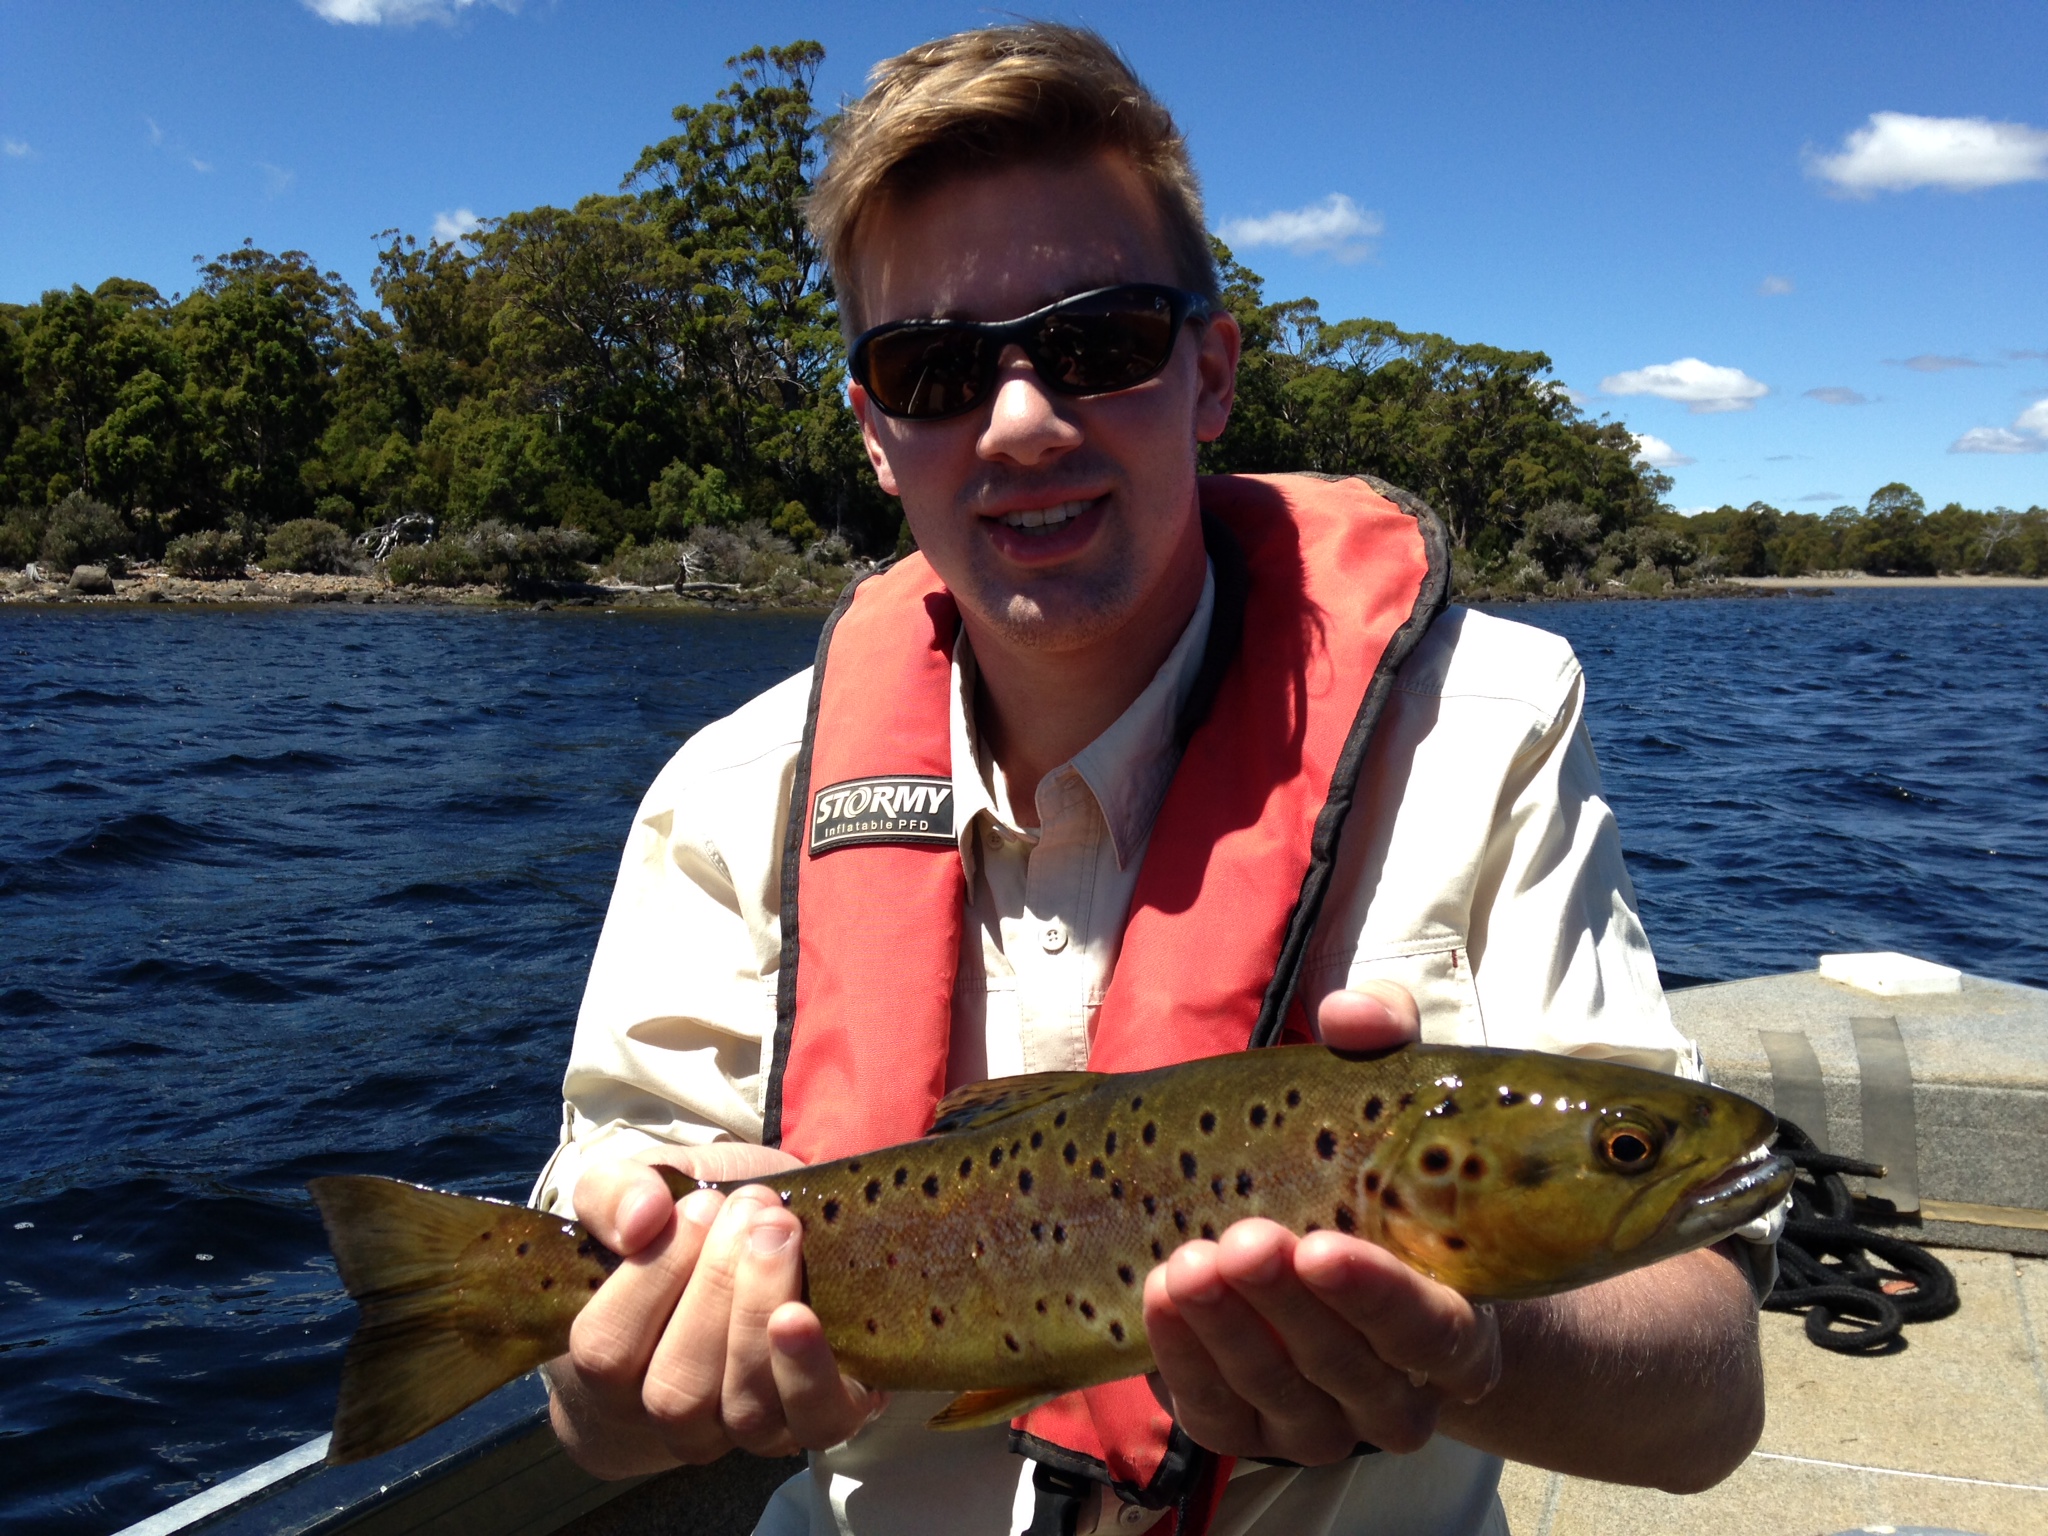 Nick Jarman at Lake St Clair with his first trout.